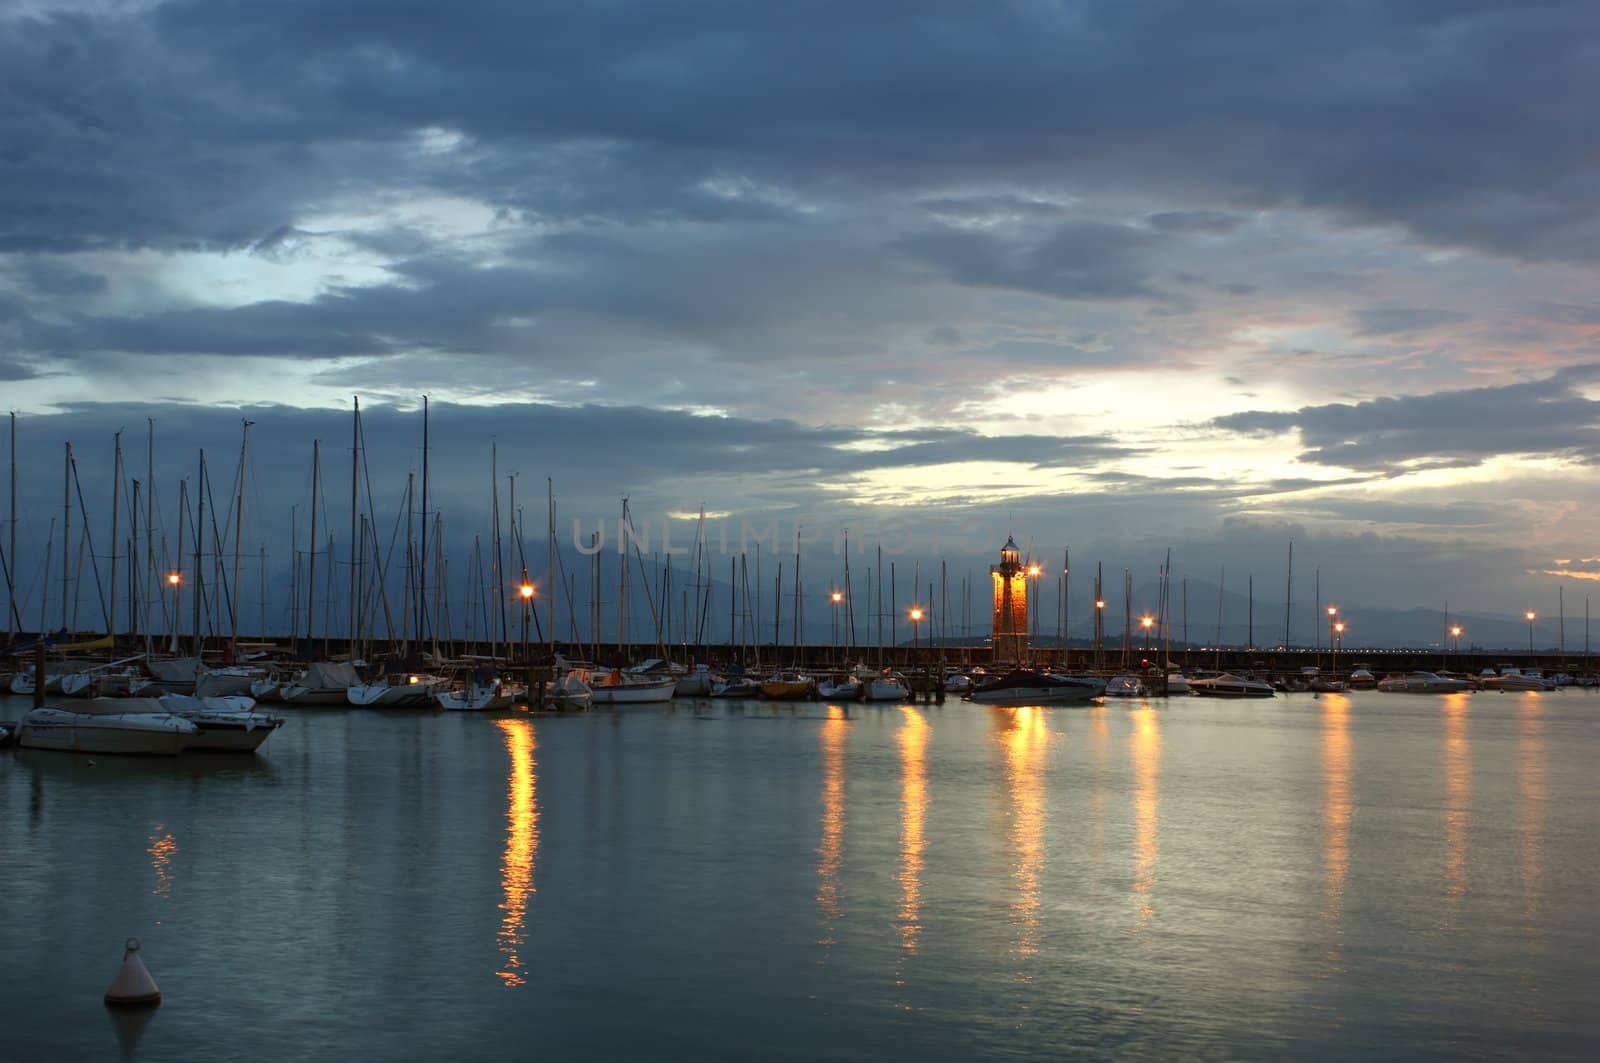 Just before the sunrise at Desenzano del Garda with the Marina and the old lighthouse.